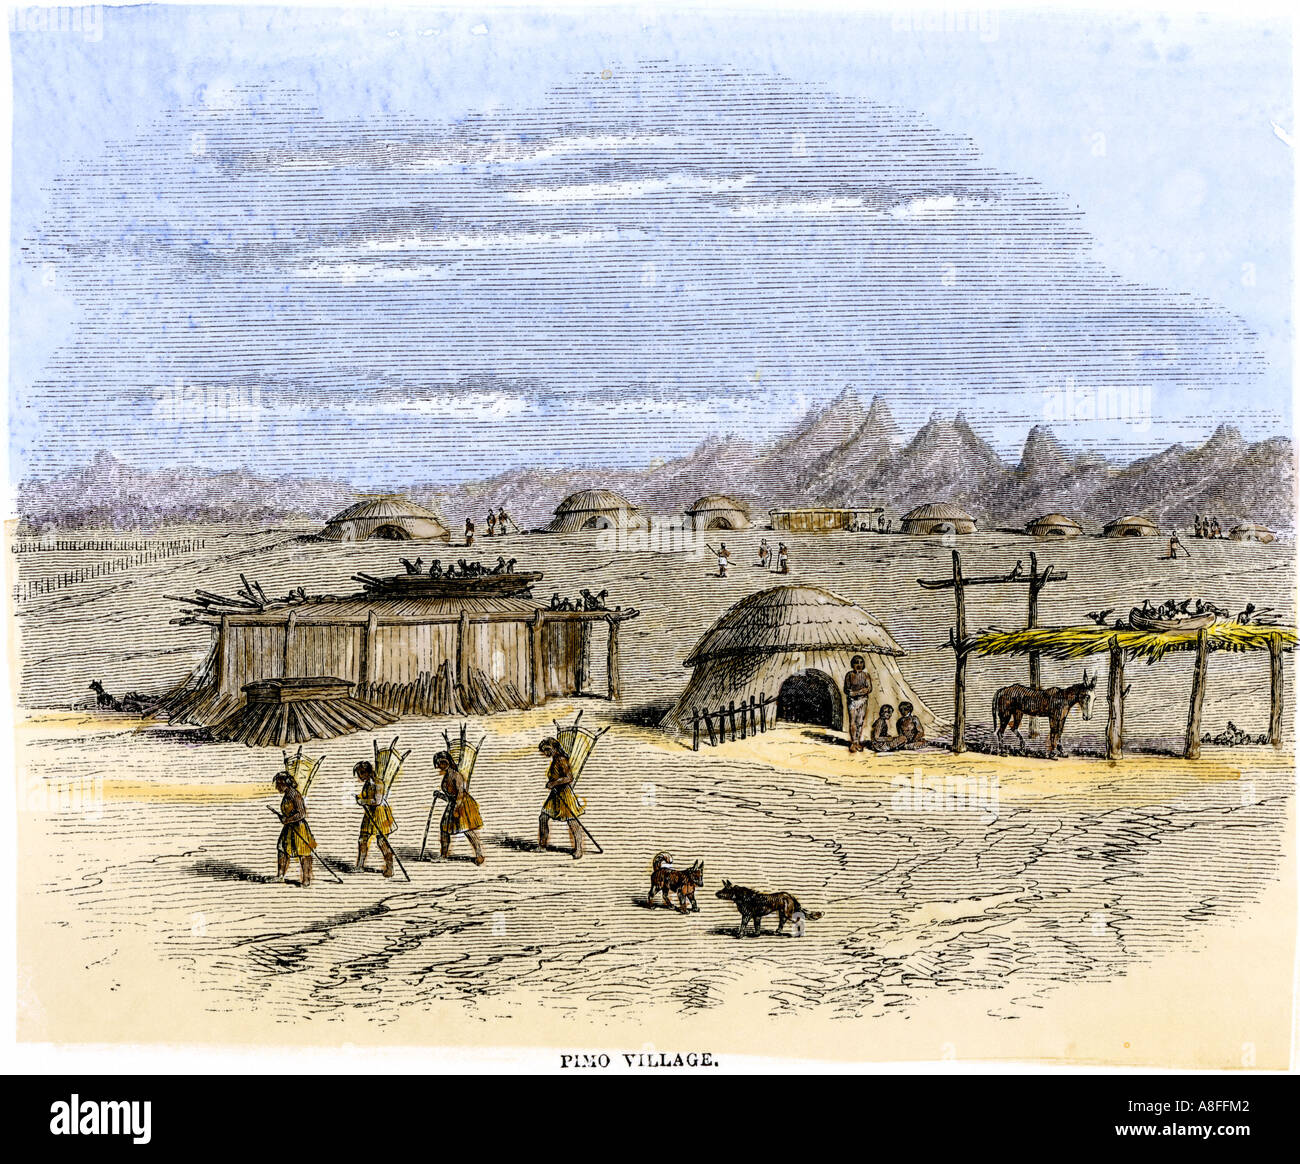 Piman Indian village in the desert southwest 1800s. Hand-colored woodcut Stock Photo